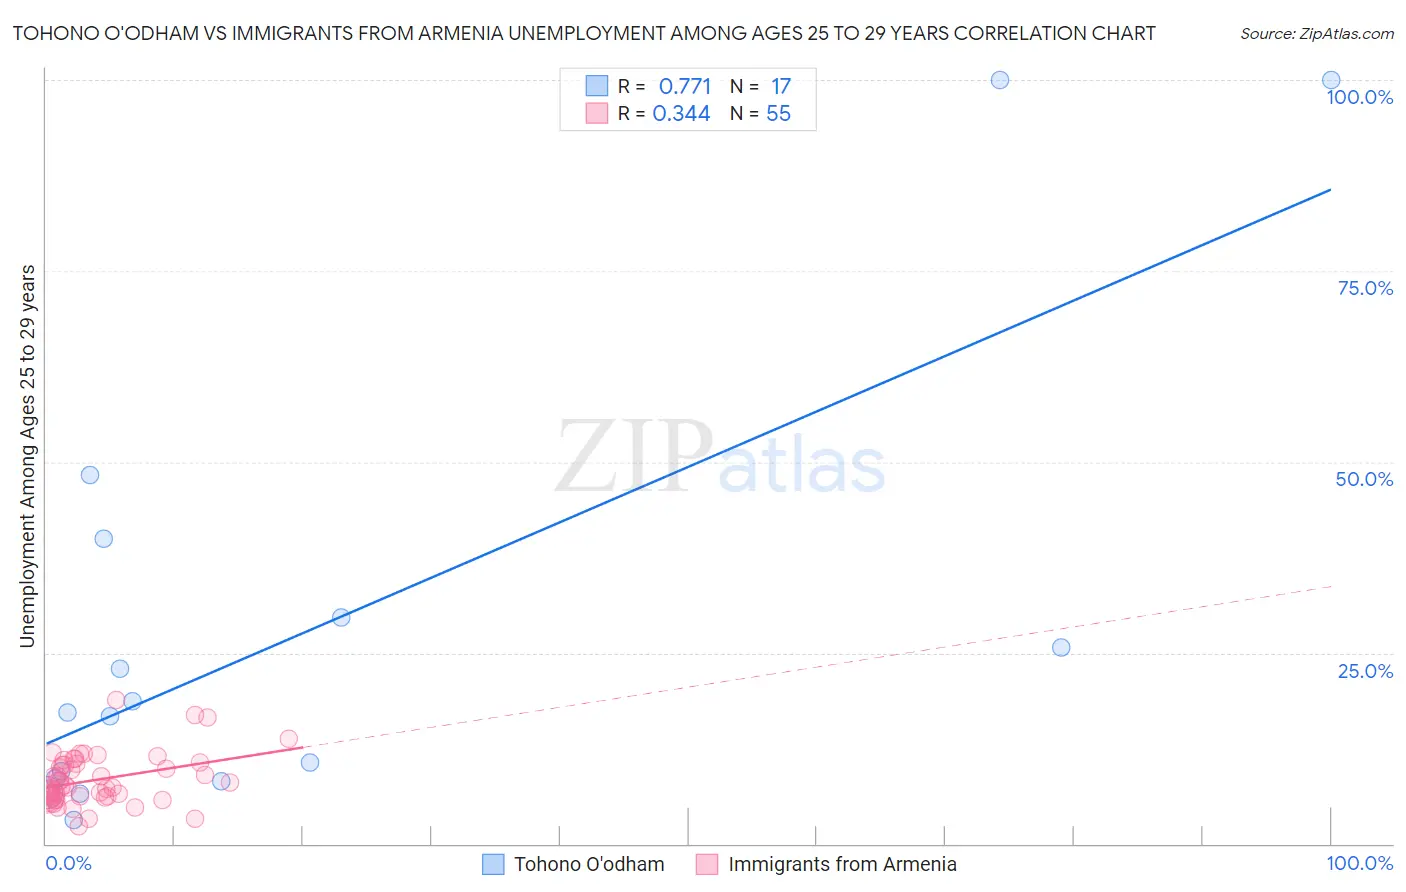 Tohono O'odham vs Immigrants from Armenia Unemployment Among Ages 25 to 29 years